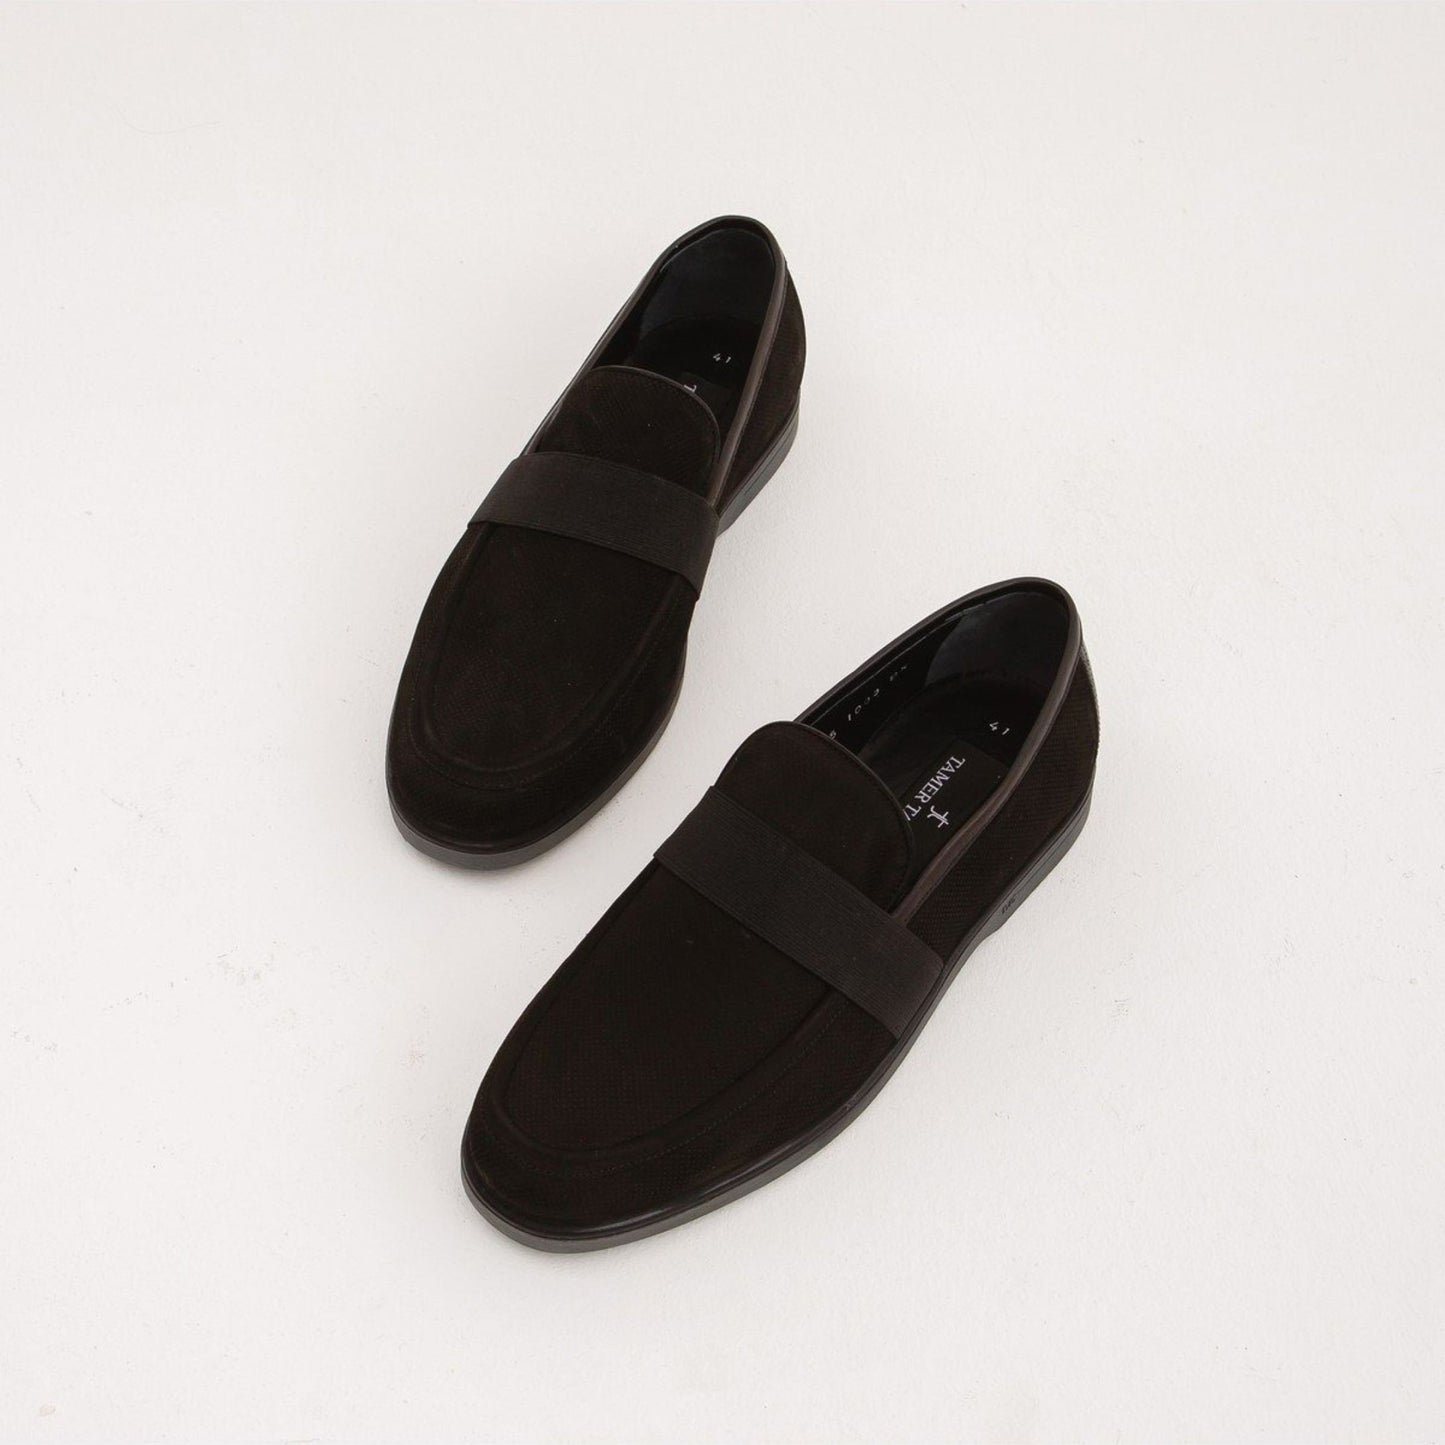 Madasat Black Nubuck Leather Casual Shoes - 639 |